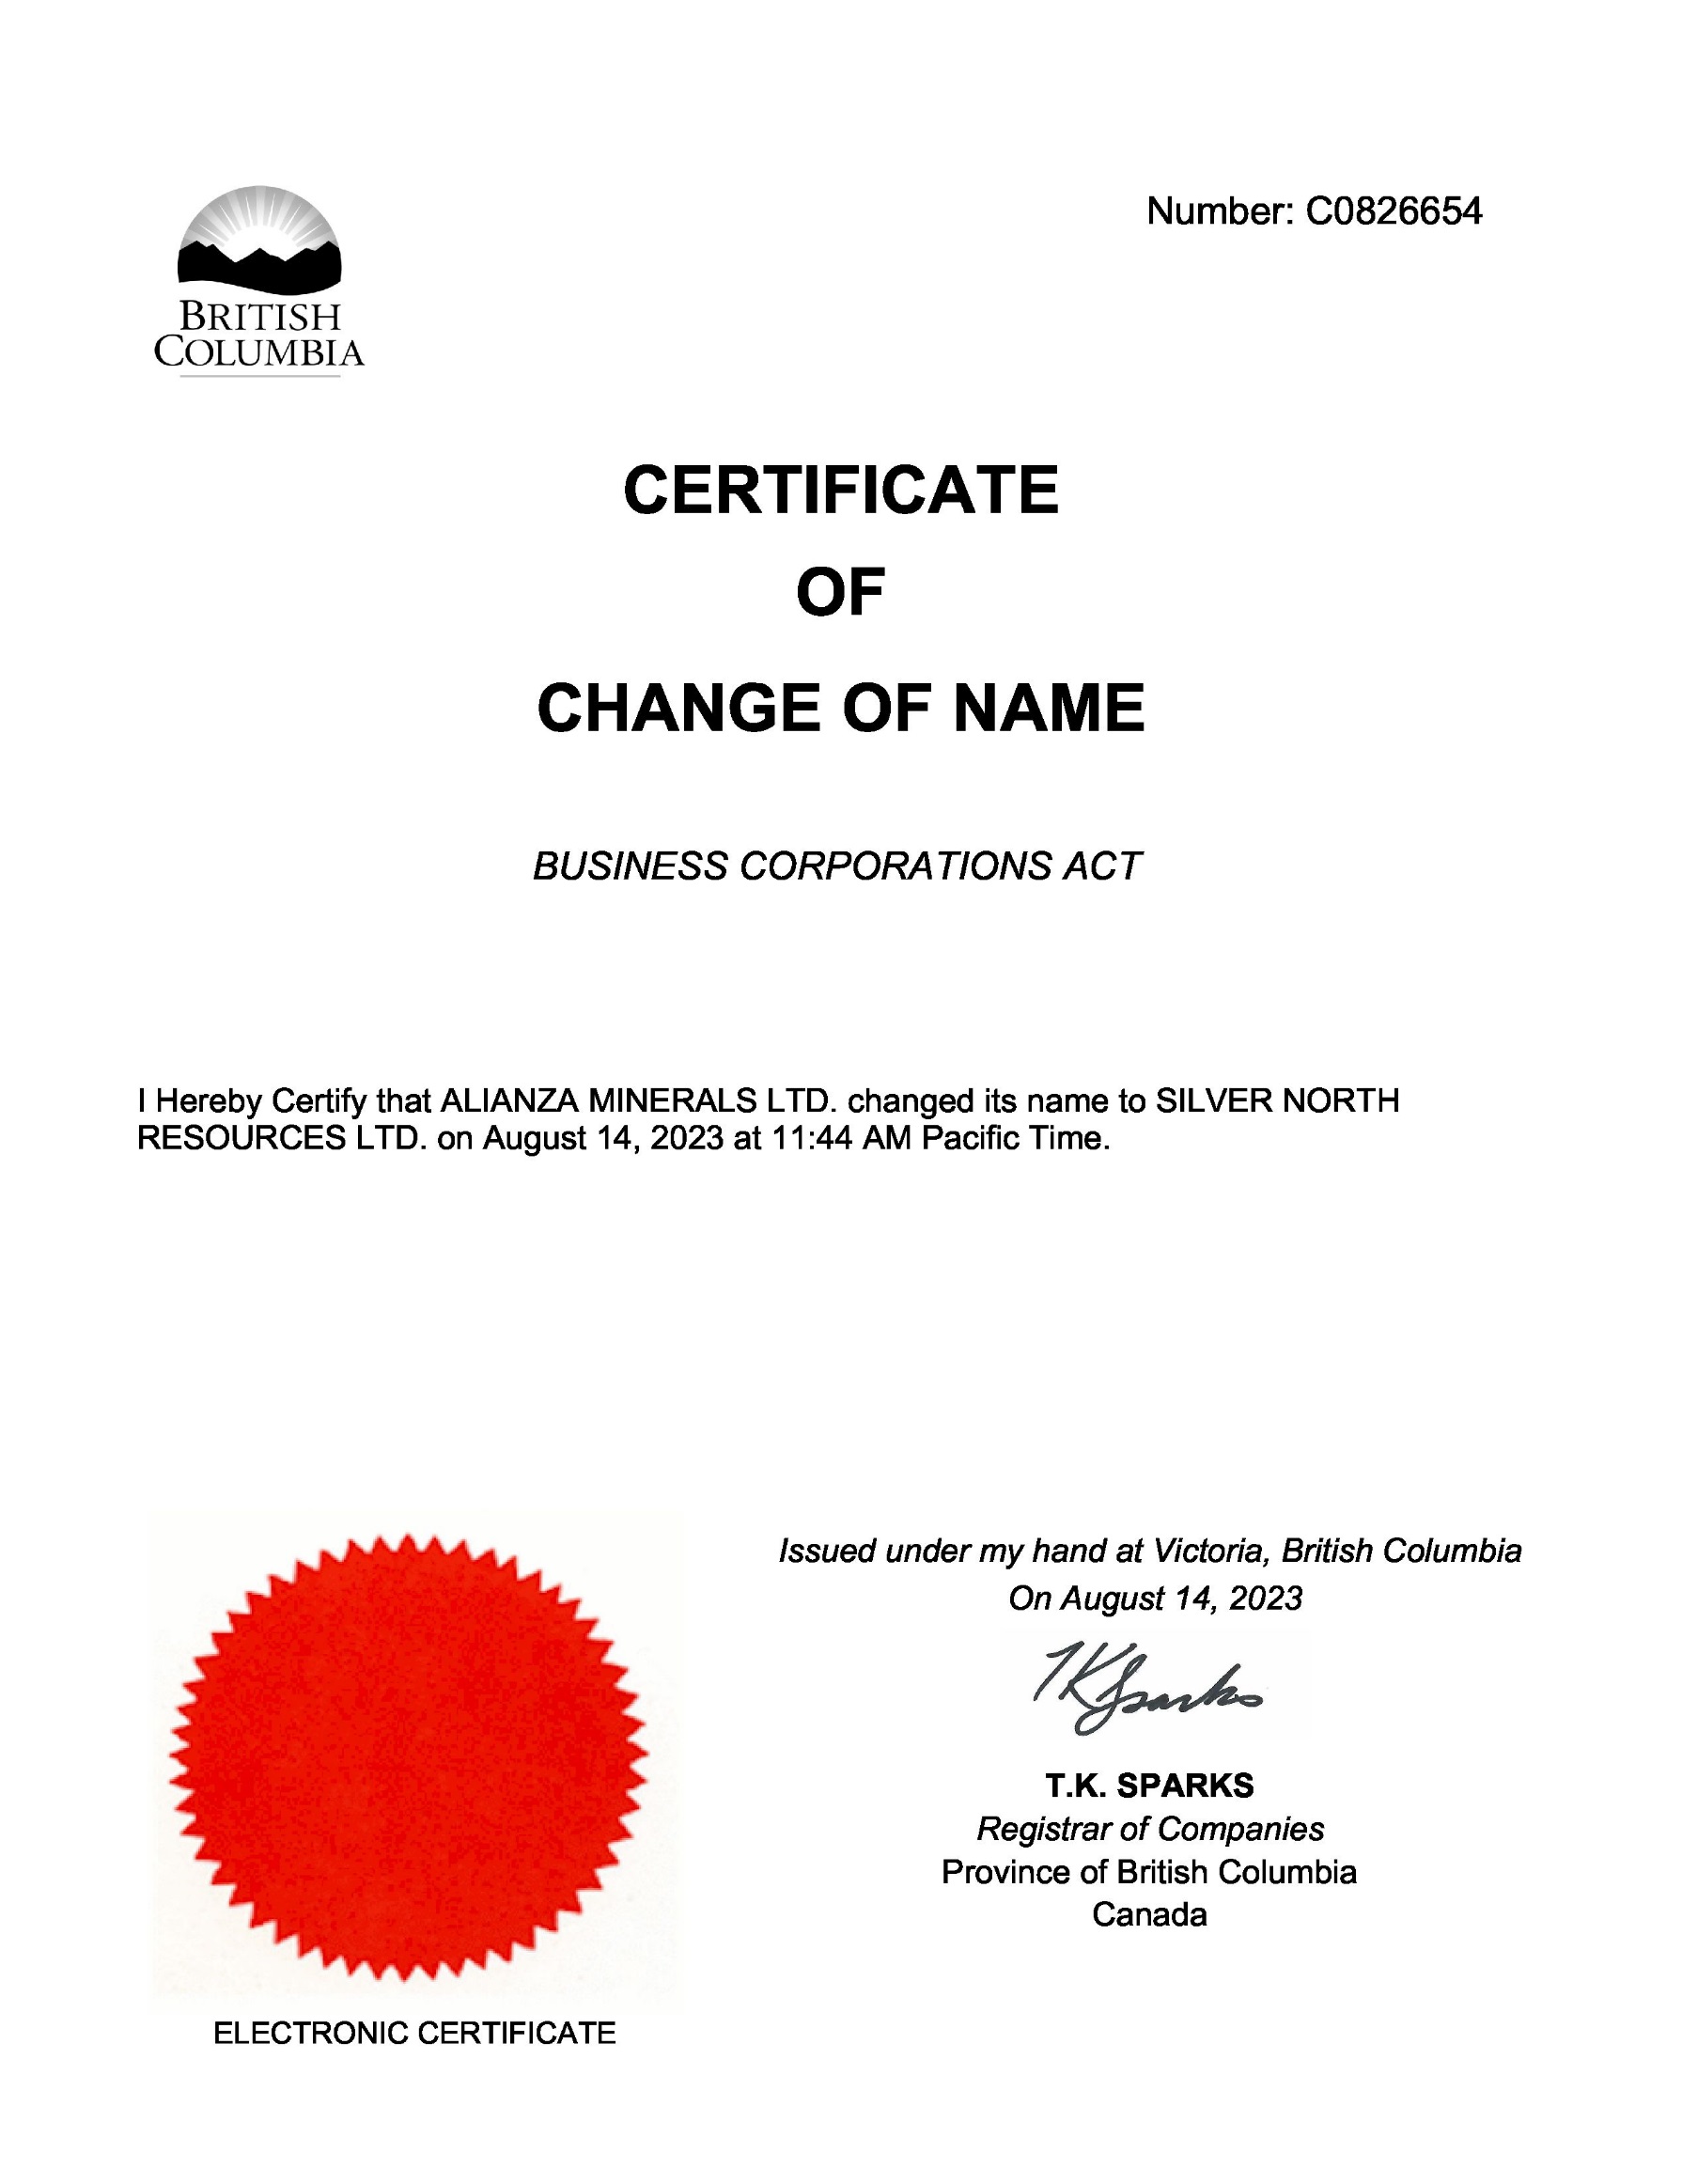 Silver North Certificate of Name Change_0001.jpg